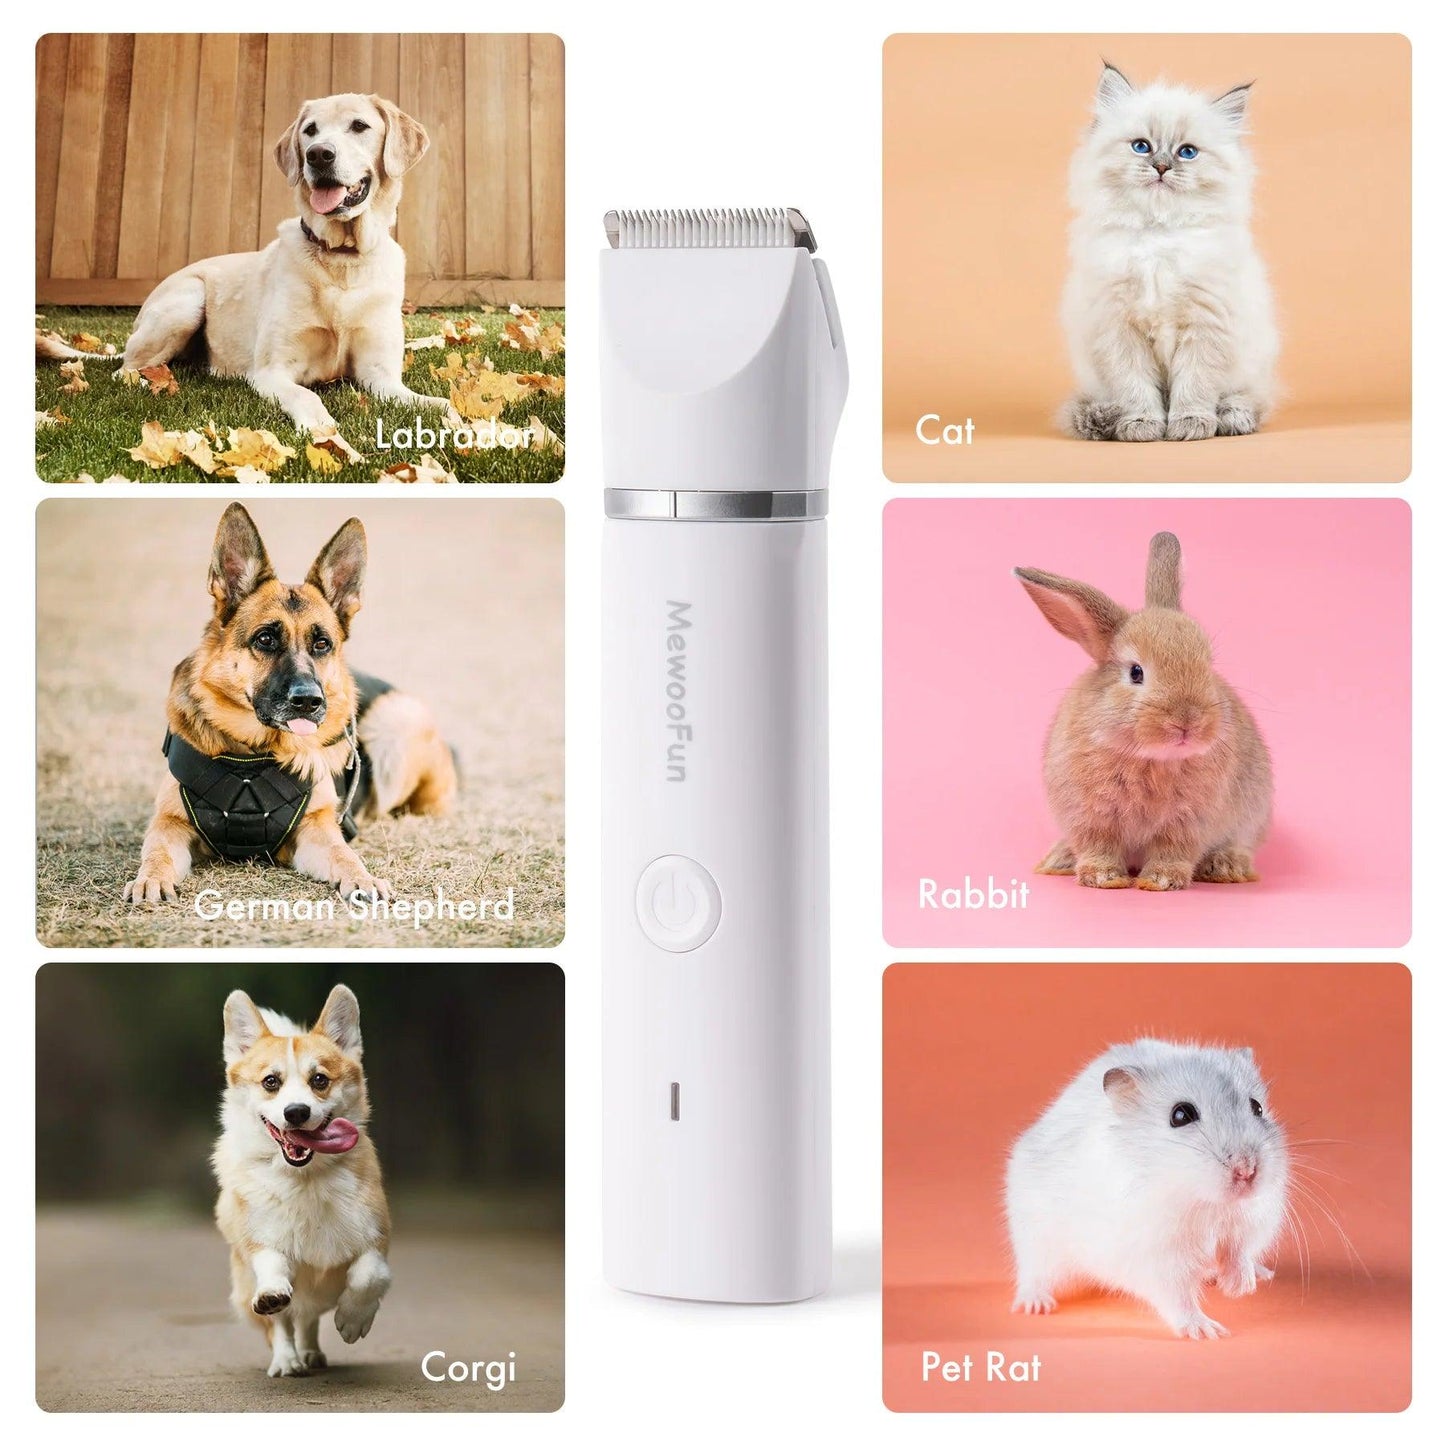 Mewoofun 4-in-1 Electric Pet Hair Trimmer - Professional Grooming Clipper & Nail Grinder for Dogs and Cats - Mewoofun Australia